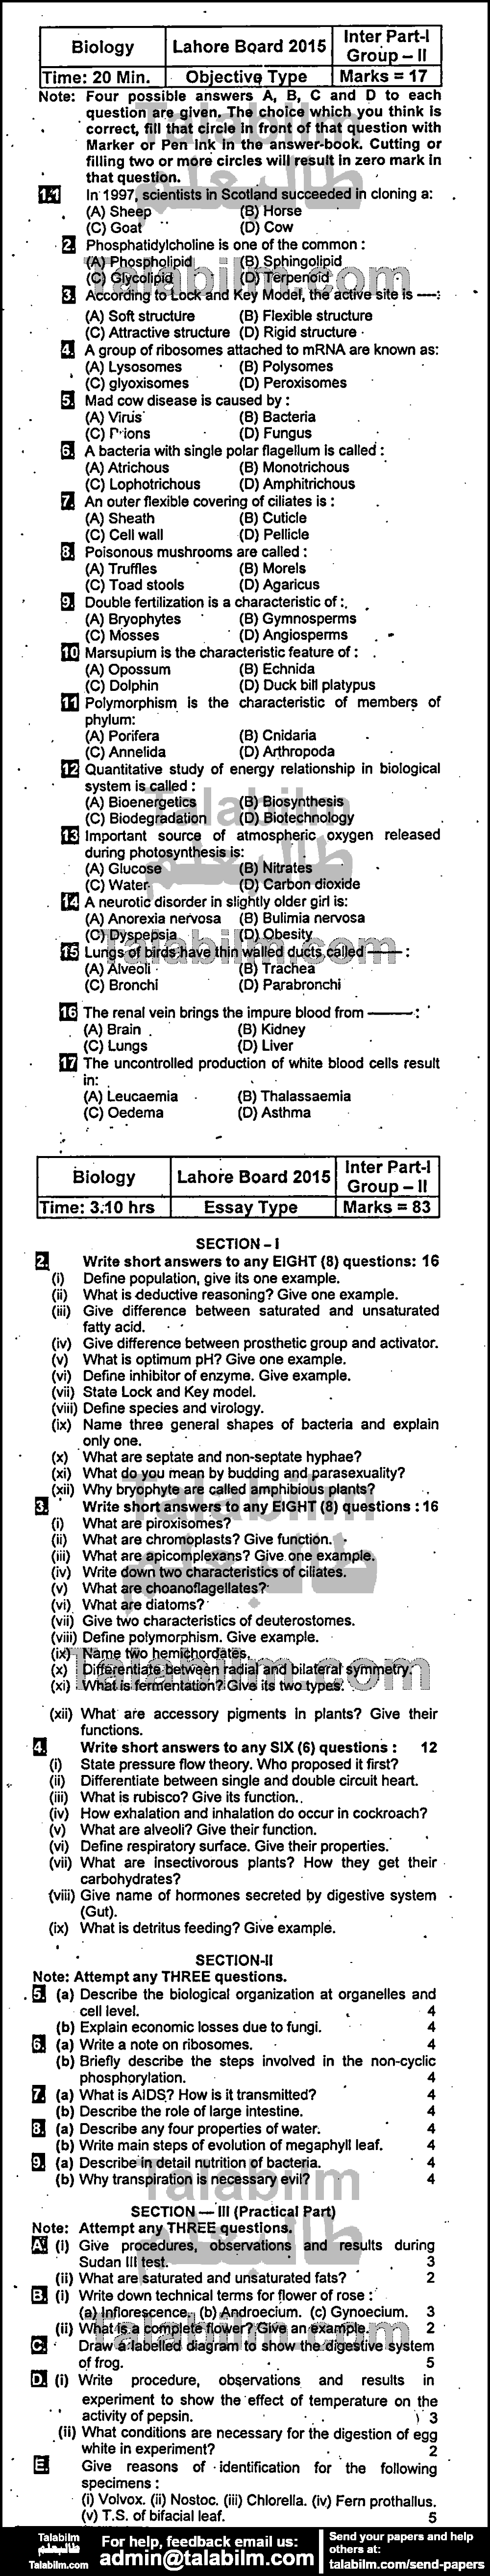 Biology 0 past paper for Group-II 2015